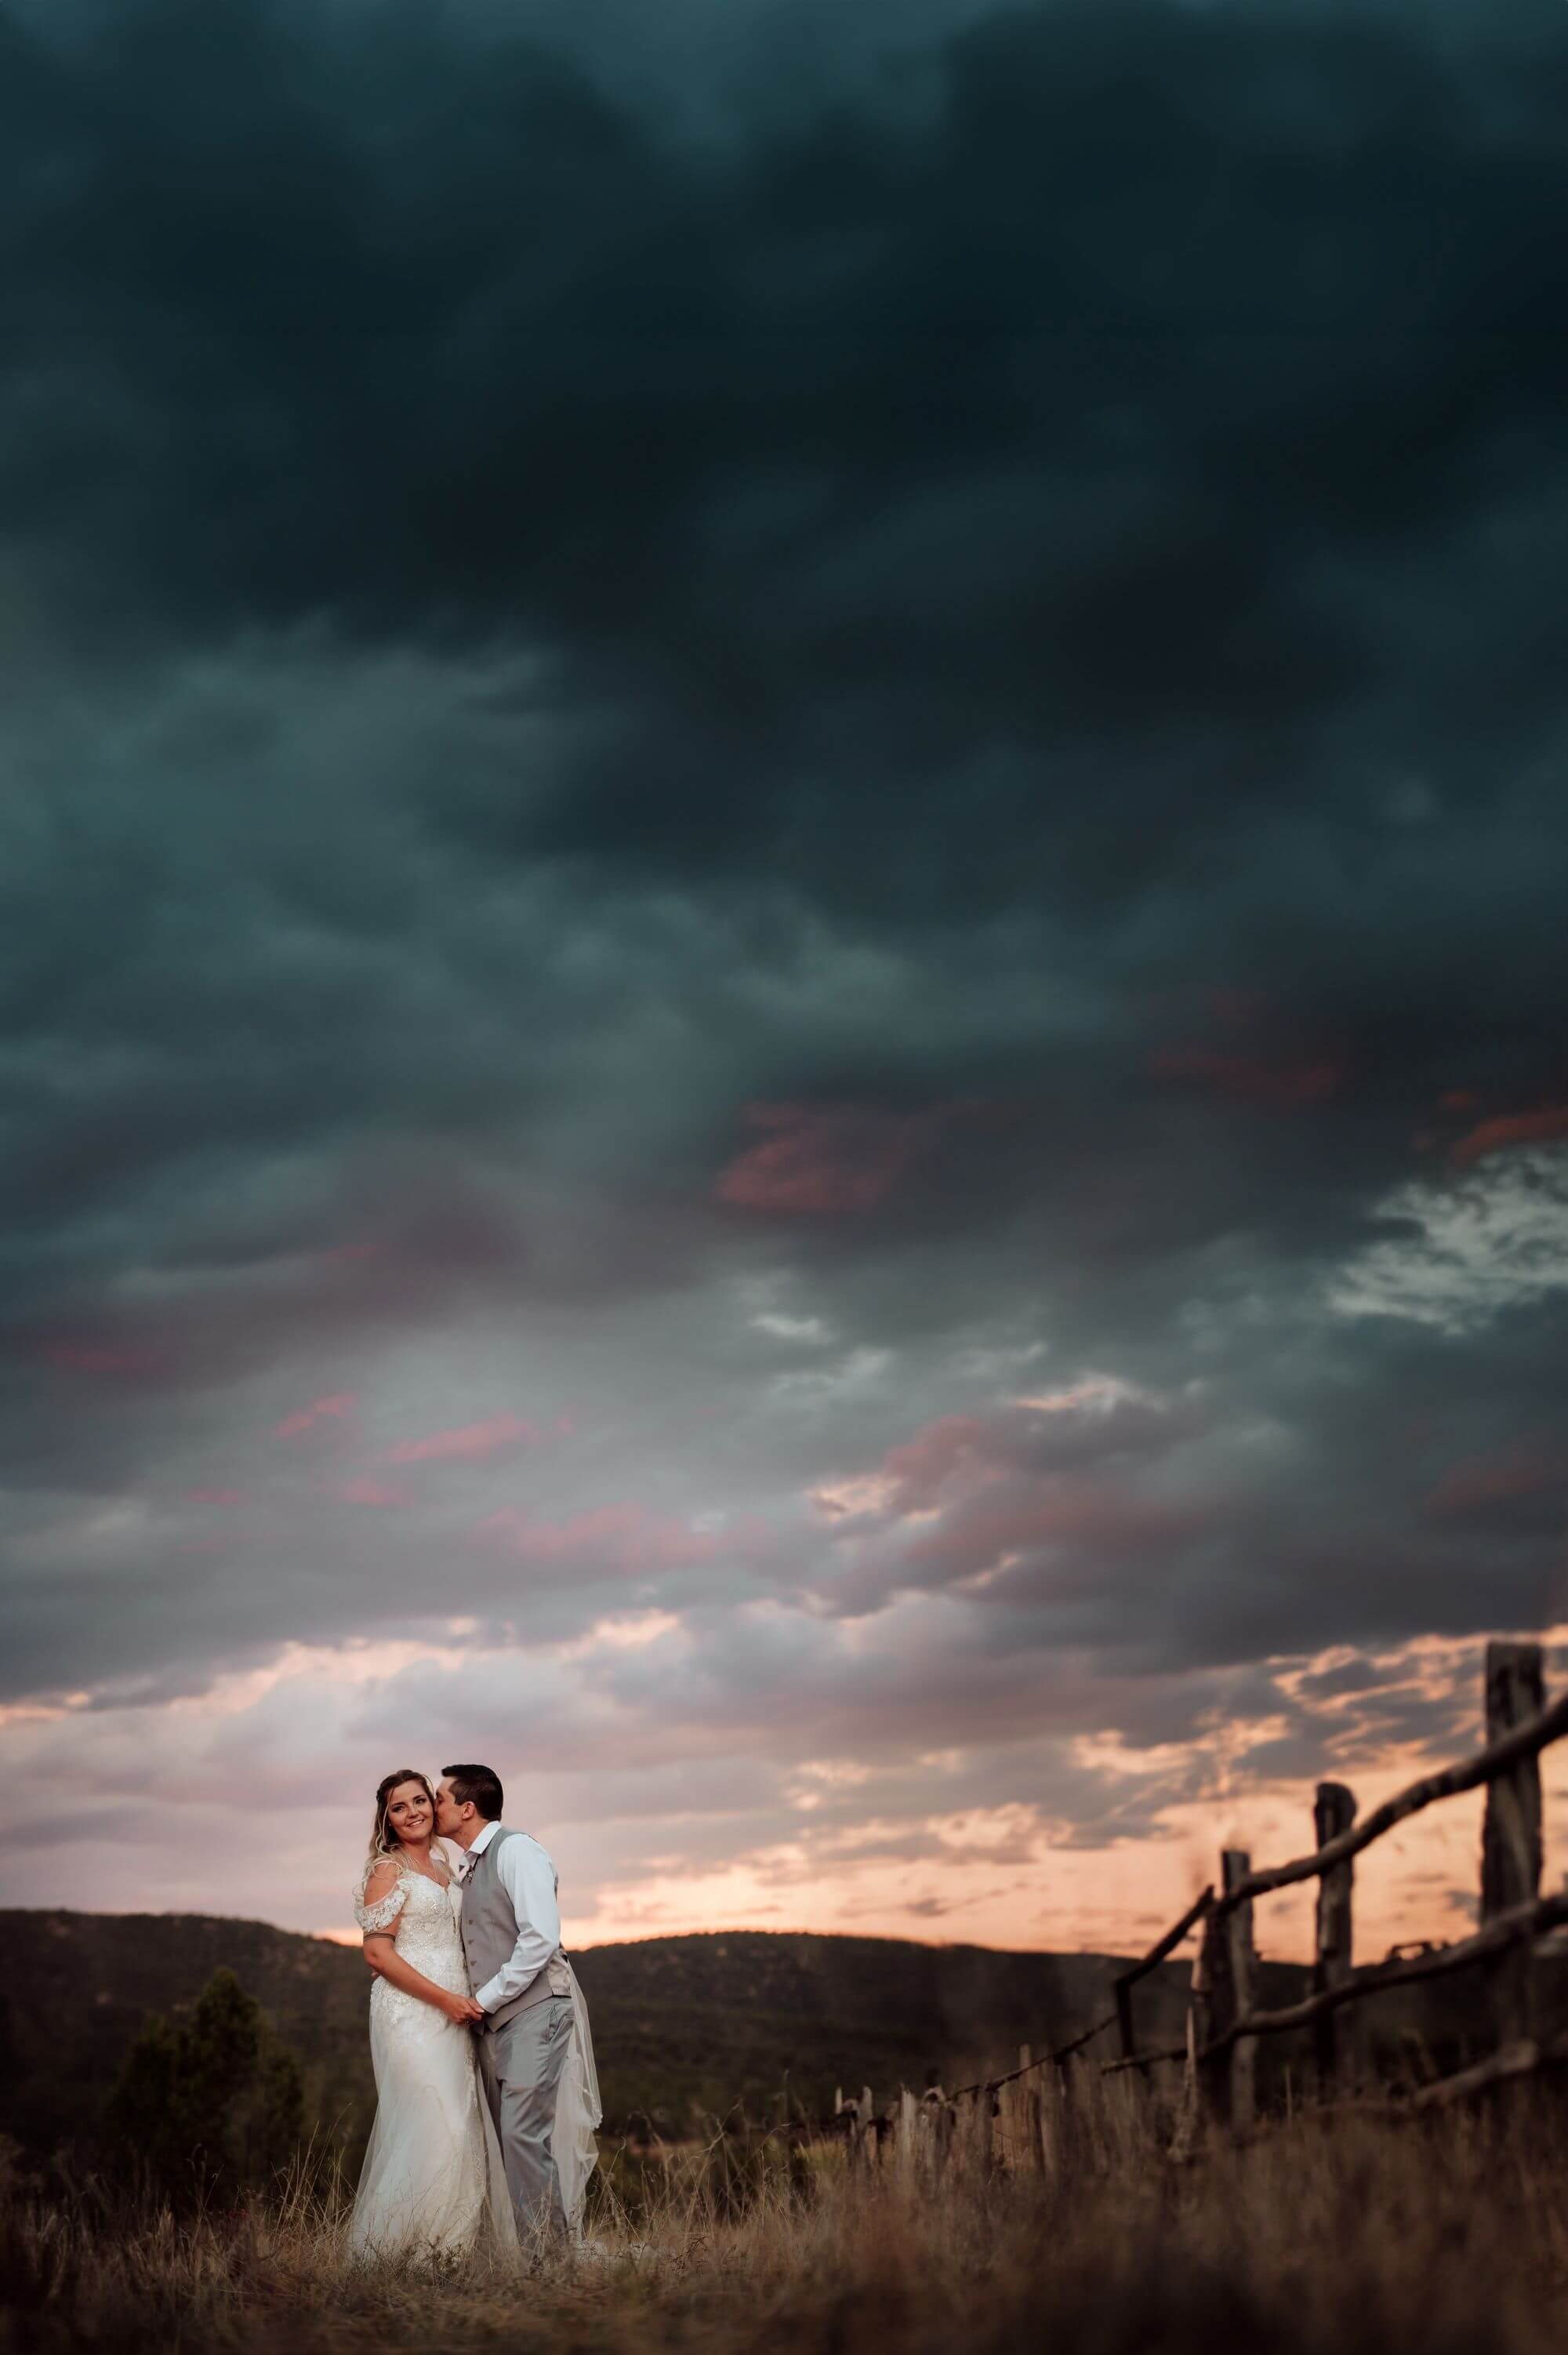 Bride and groom in Northern NM at sunset